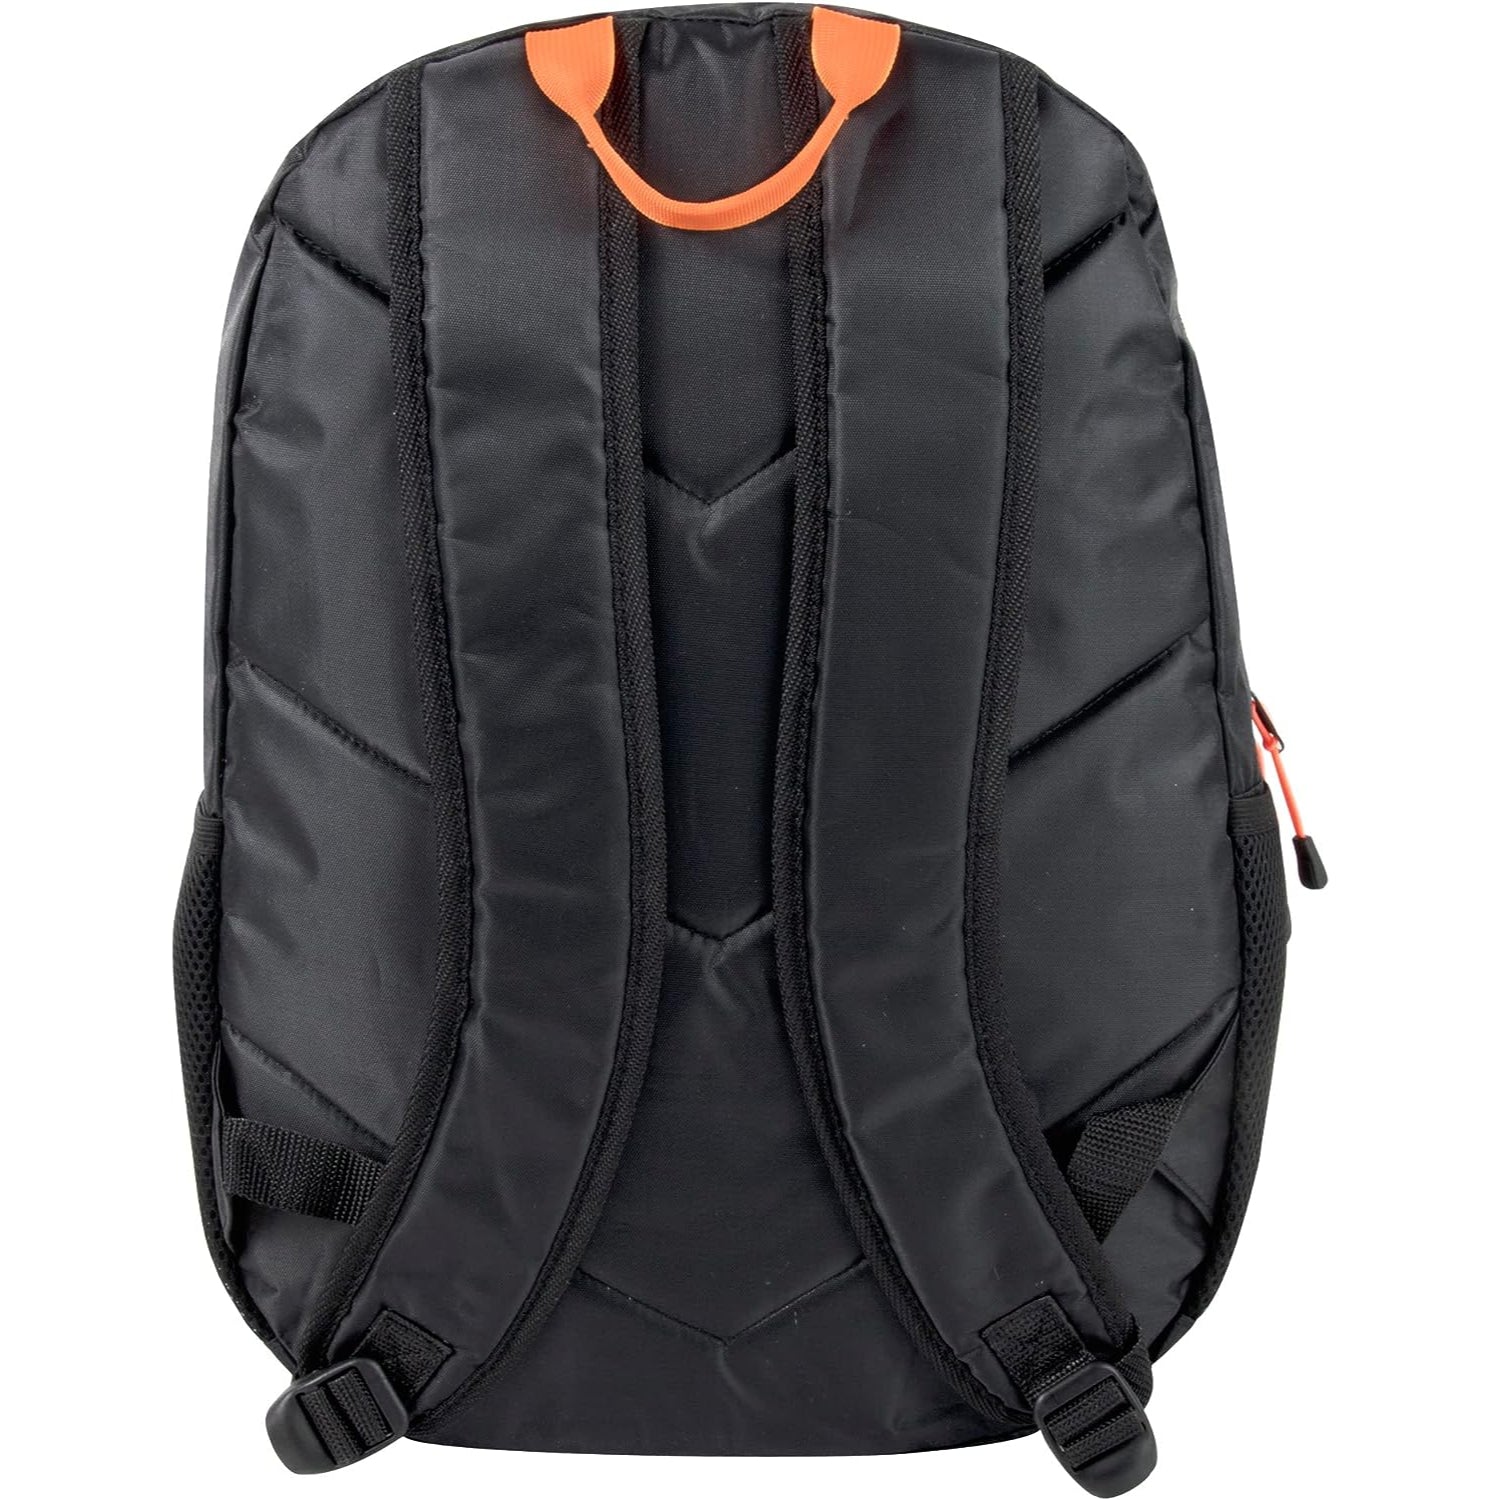 AD Sutton Summit Ridge Backpack With 17'' Laptop Pocket, Black